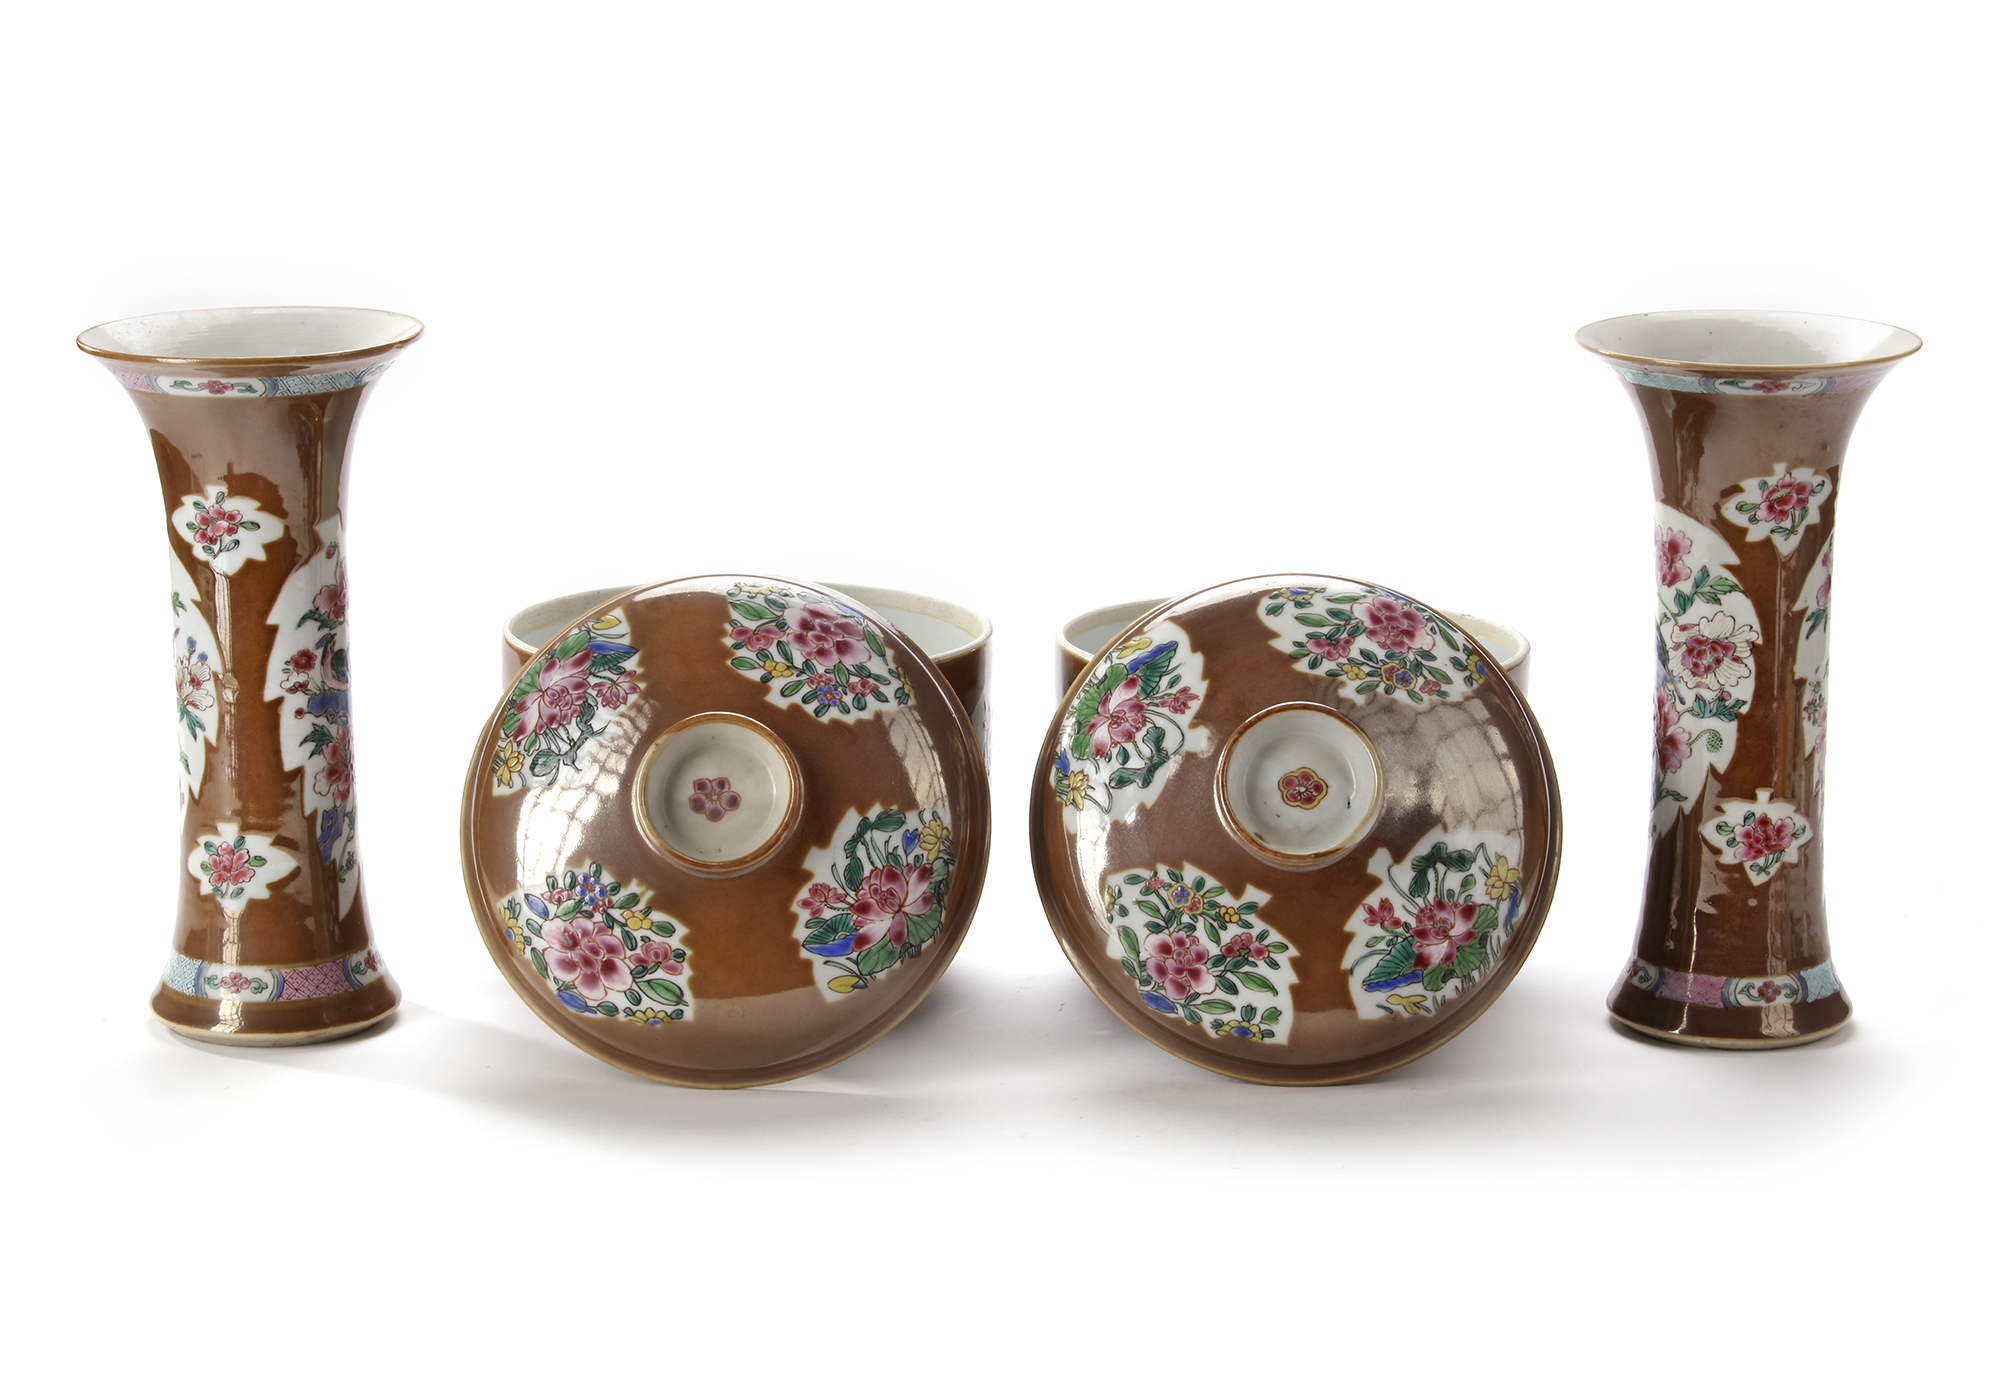 A PAIR OF CHINESE FAMILLE ROSE BEAKERS AND COVERED JARS, 18TH CENTURY - Image 3 of 5